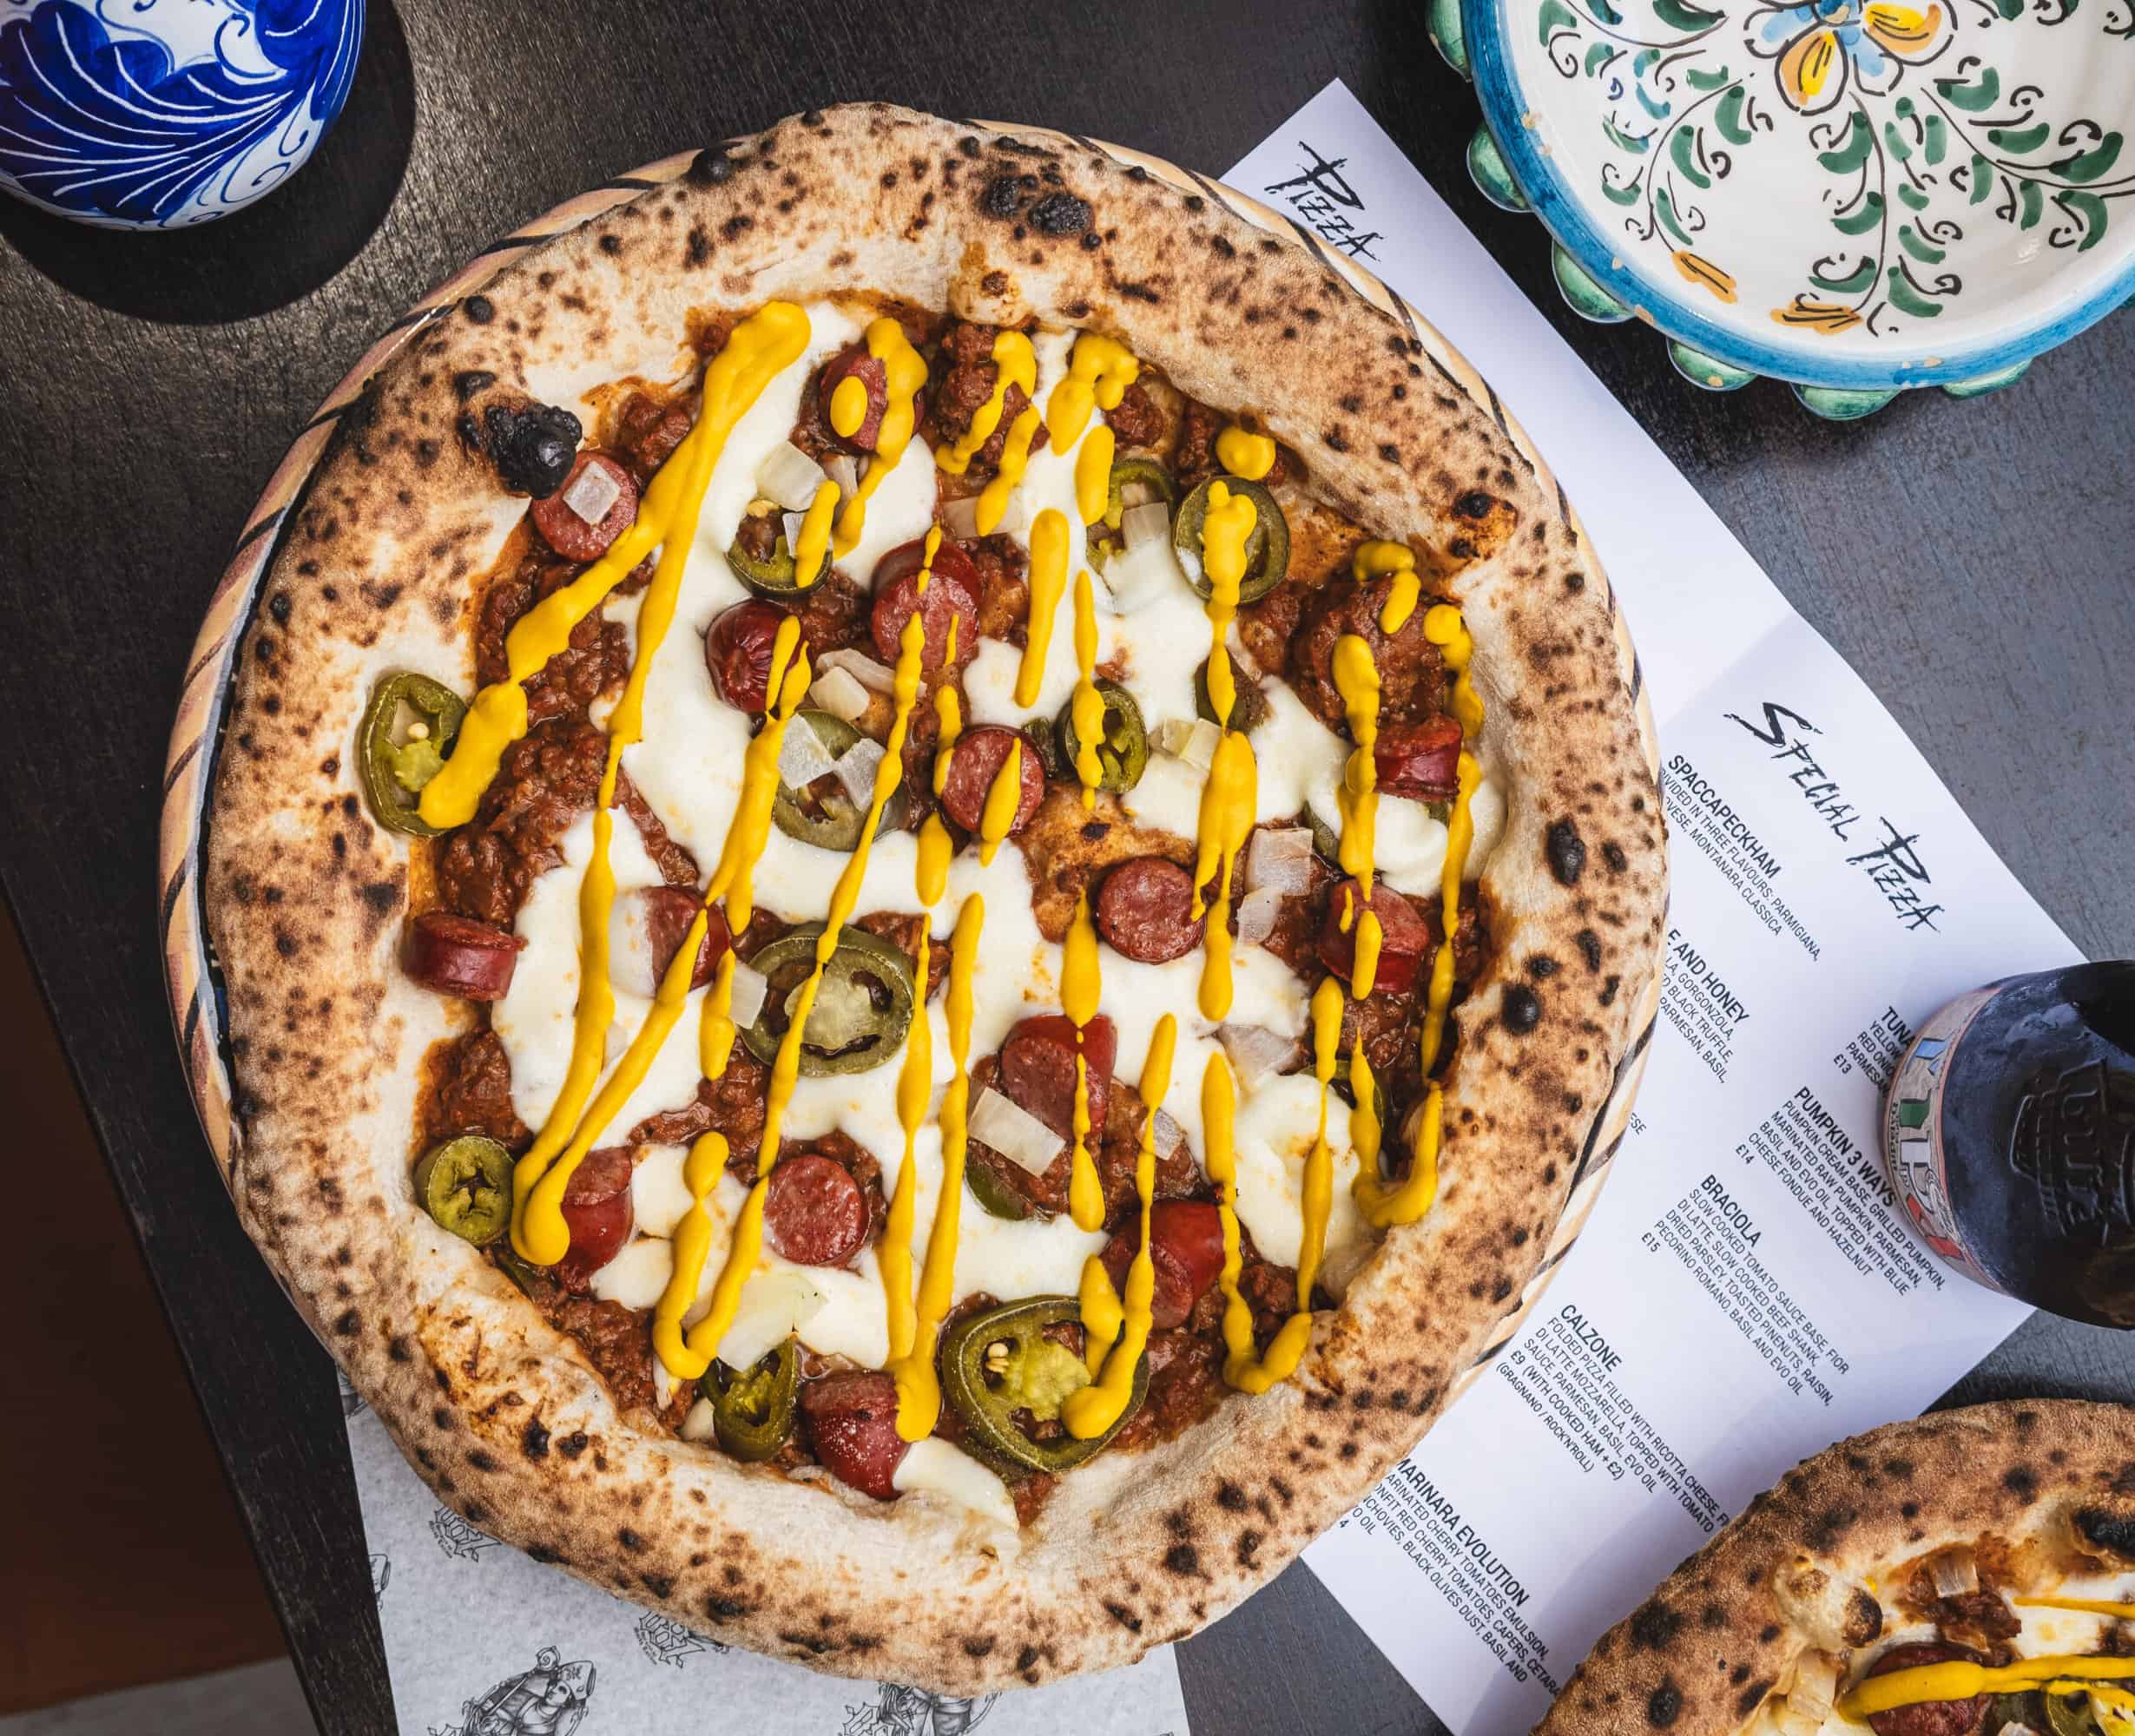 081 Pizzeria teams up with Meatliquor to launch limited edition ‘Chilli Dog Inferno’